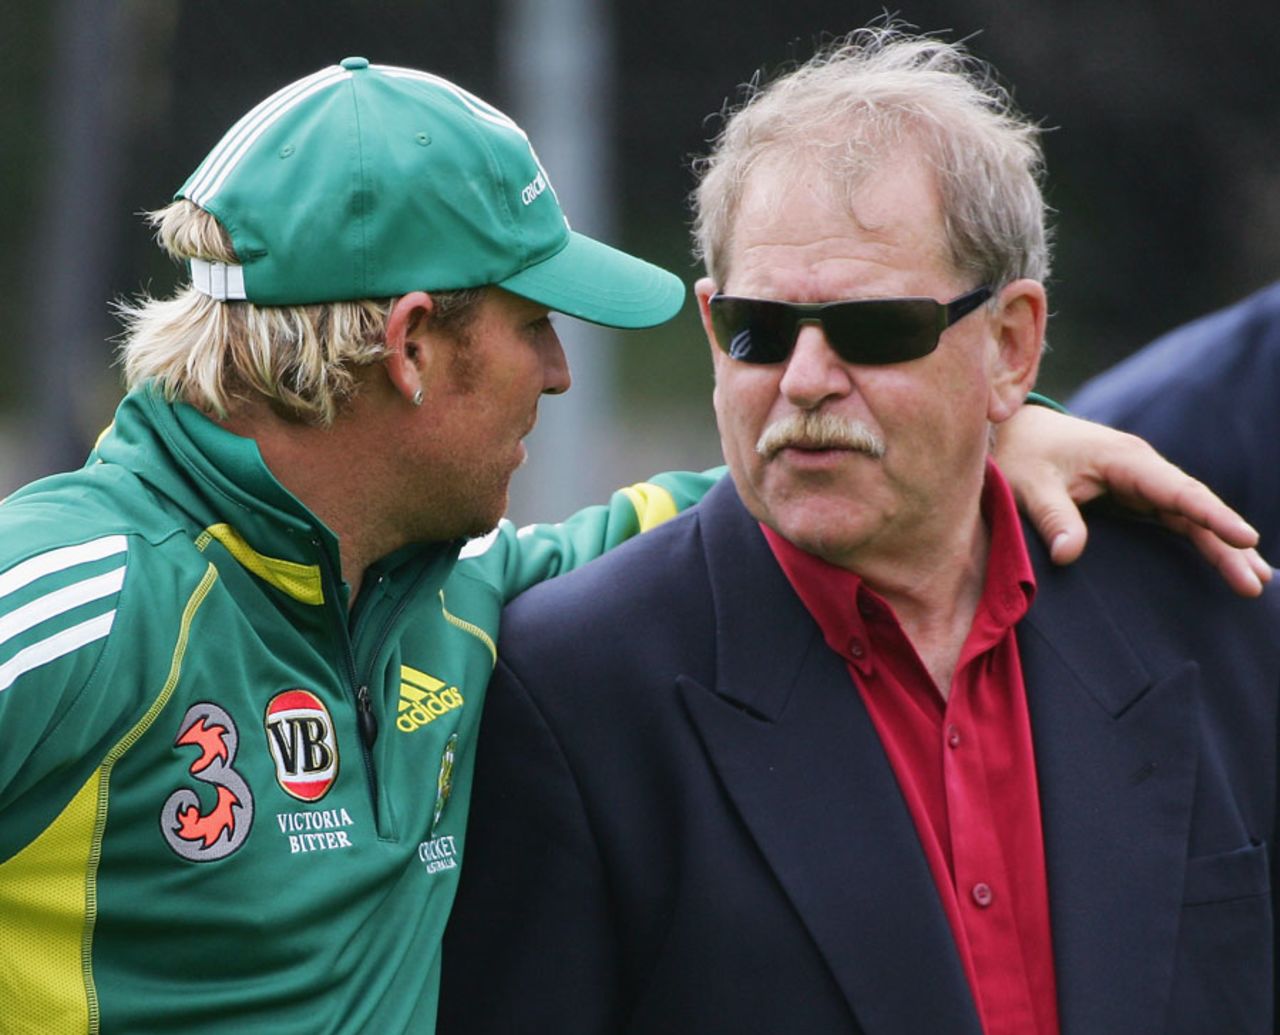 Shane Warne chats with Terry Jenner, Hobart, November 15, 2005